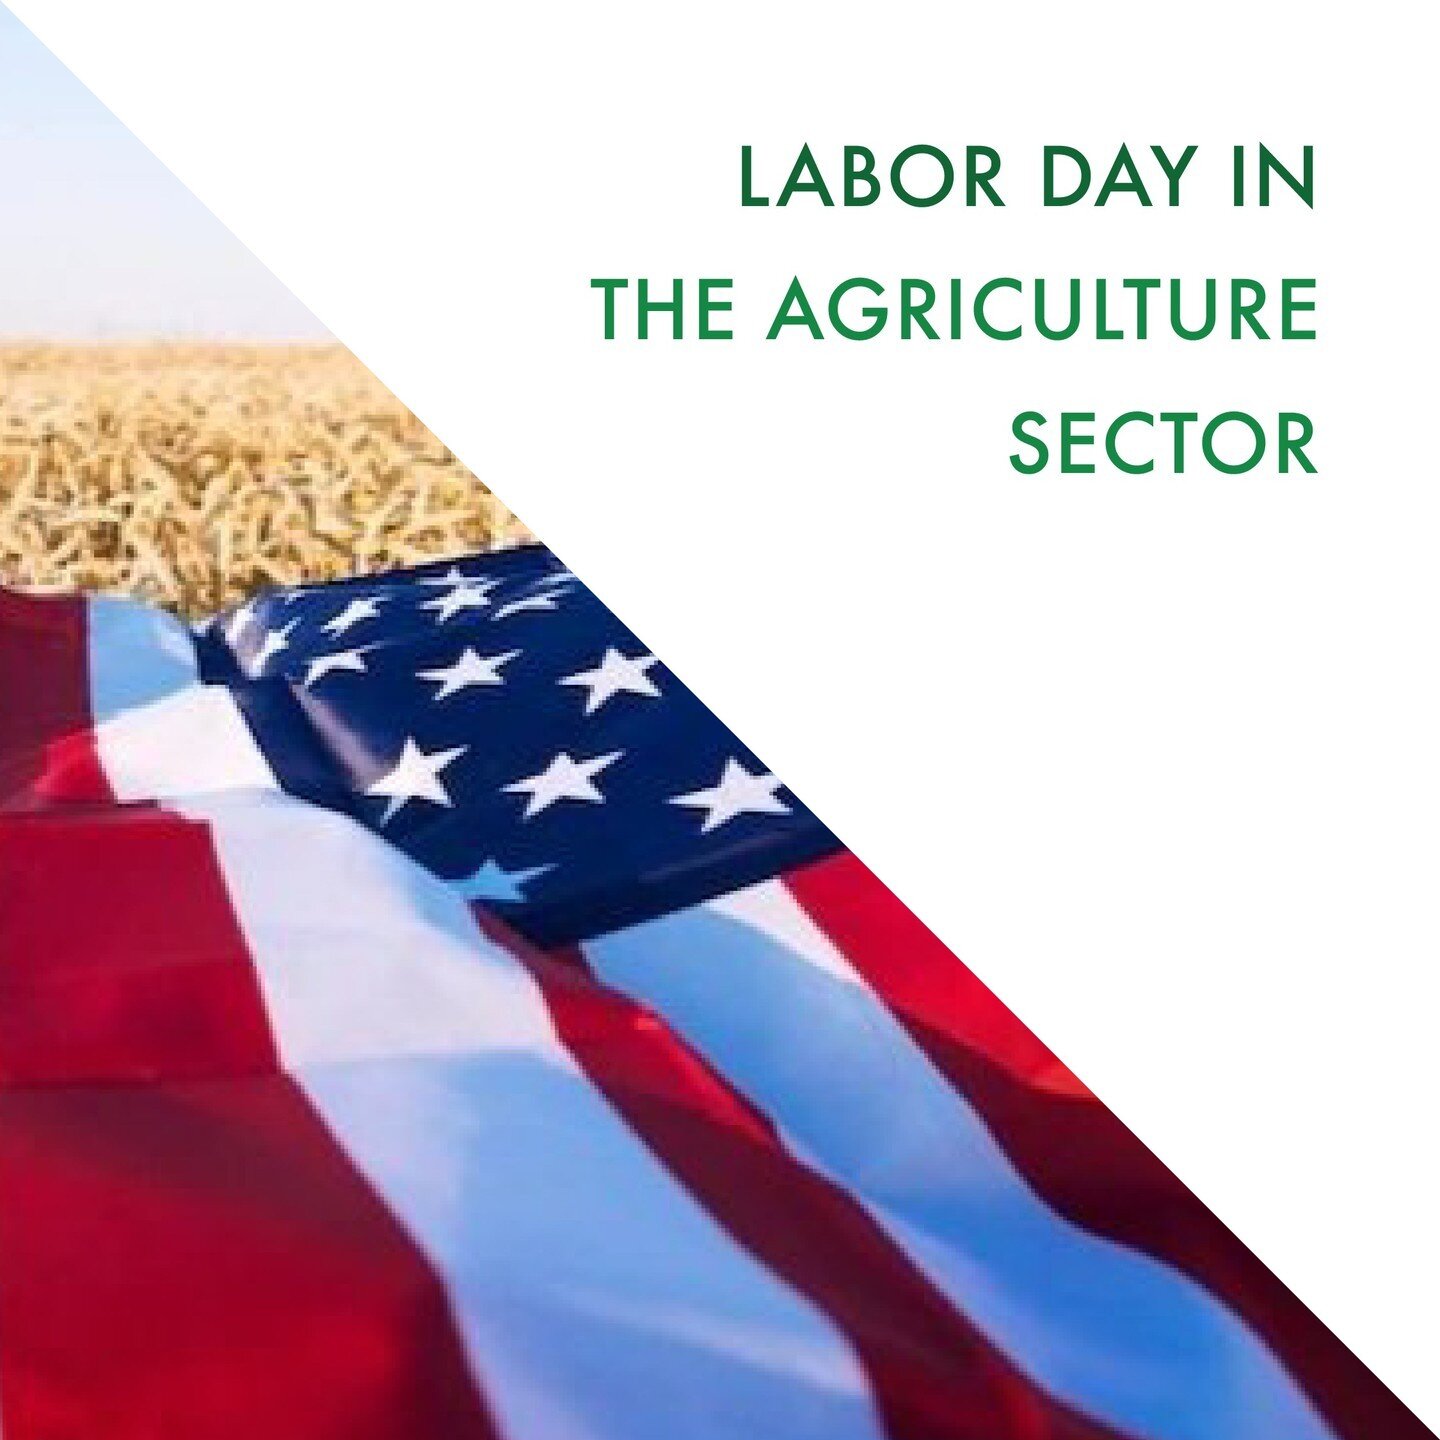 Labor Day has been a recognized holiday in the US for more than a century. It was created after several initiatives, such as labor-related movements and activism. The history of Labor Day in the agricultural industry is described here.

For more info